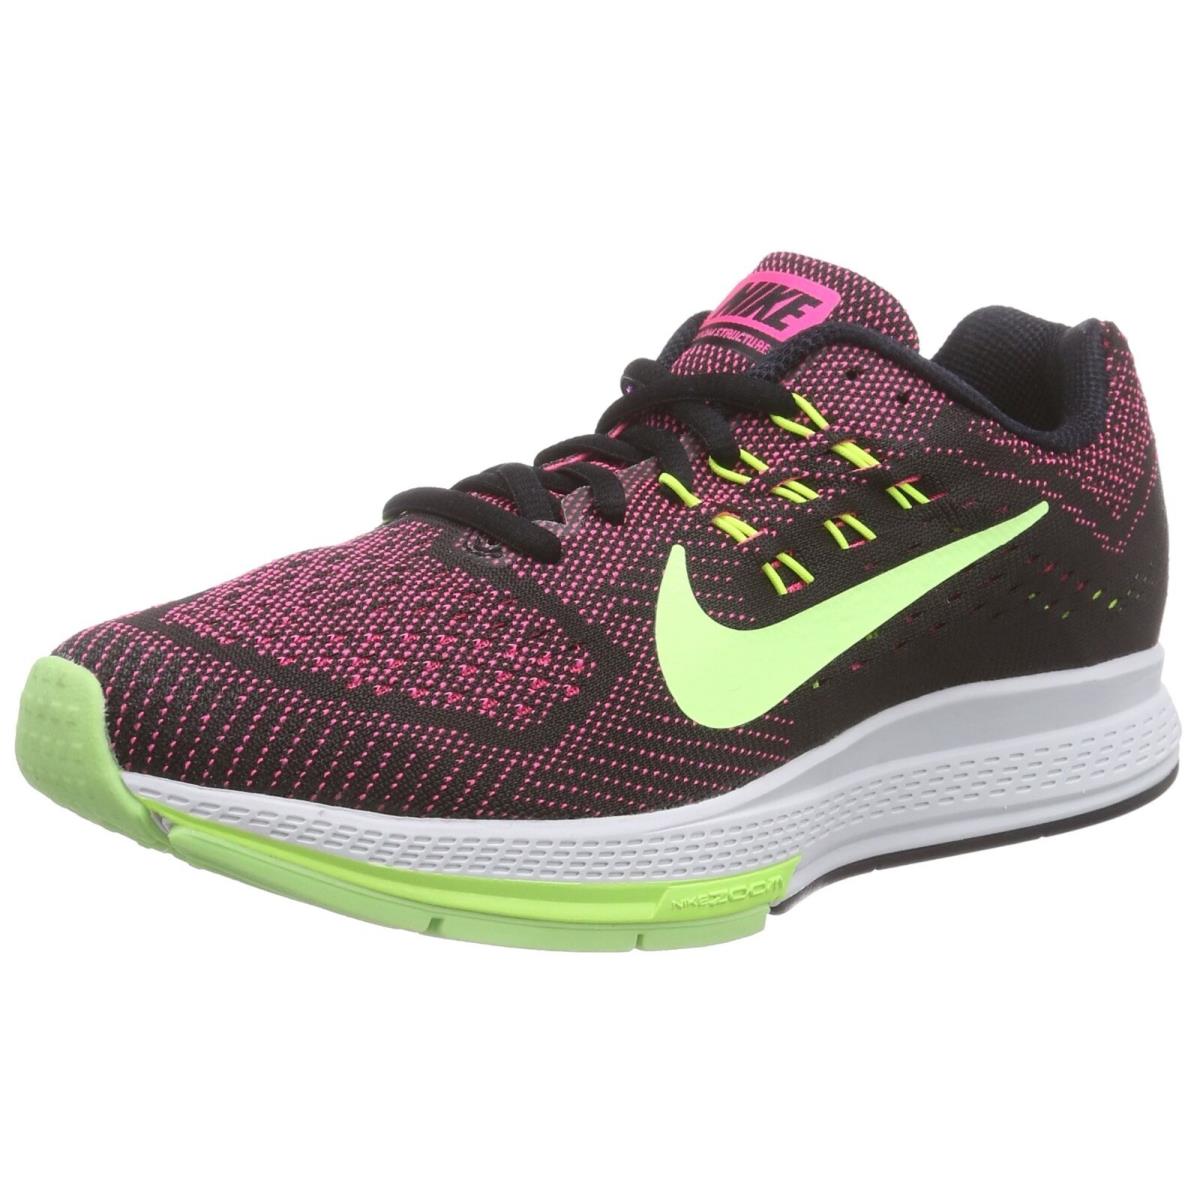 Nike Air Zoom Structure 18 Womans Running Shoes Multi-color 683737-603 Sz 10 12 - Multi-Color